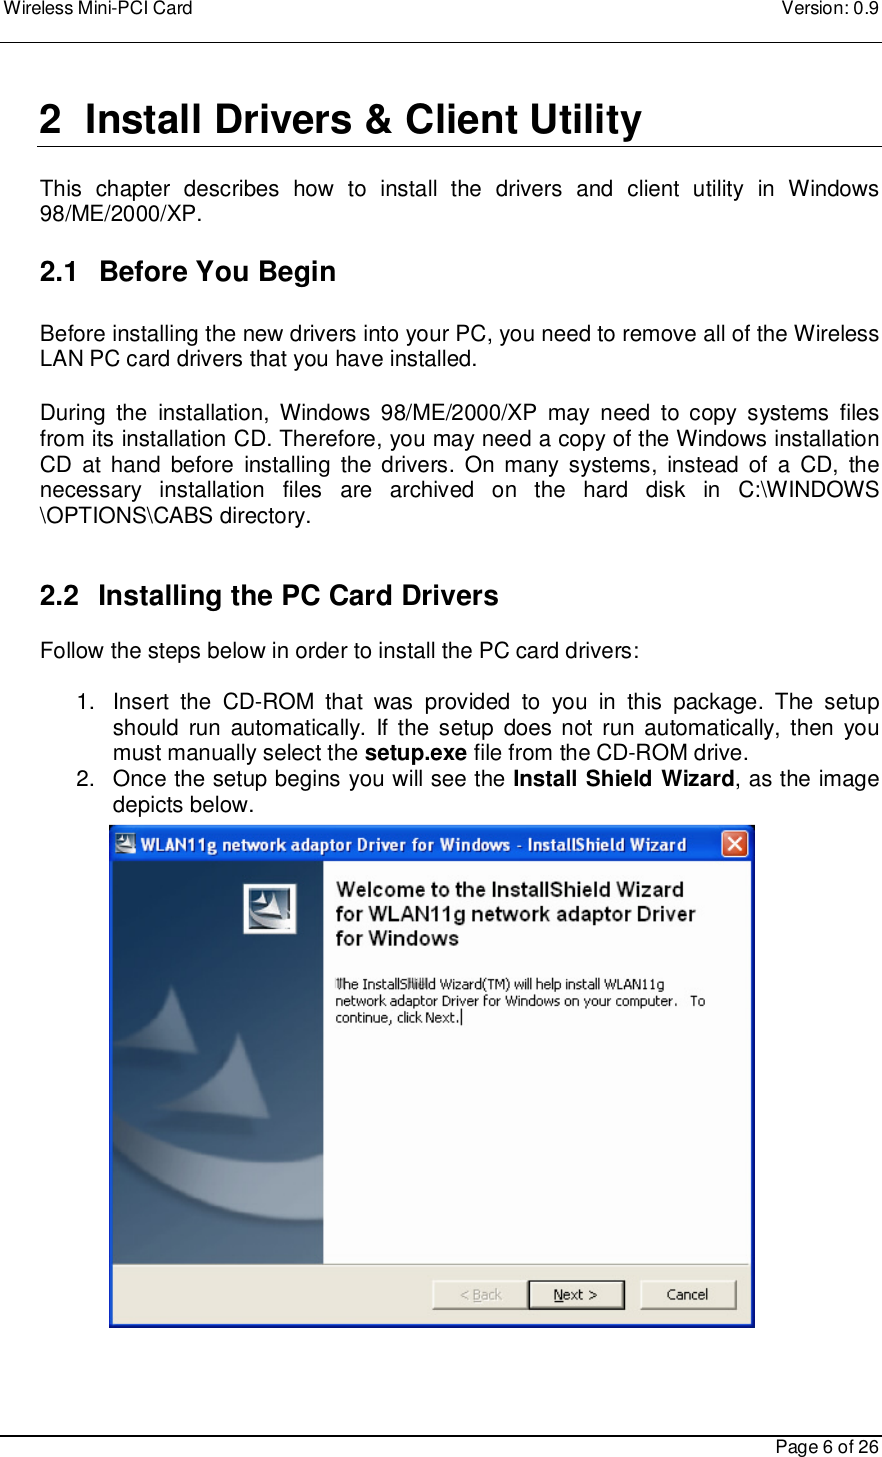 Wireless Mini-PCI Card    Version: 0.9    Page 6 of 26  2  Install Drivers &amp; Client Utility  This  chapter  describes  how  to  install  the  drivers  and  client  utility  in  Windows 98/ME/2000/XP.    2.1   Before You Begin  Before installing the new drivers into your PC, you need to remove all of the Wireless LAN PC card drivers that you have installed.  During  the  installation,  Windows  98/ME/2000/XP  may  need  to  copy  systems  files from its installation CD. Therefore, you may need a copy of the Windows installation CD  at  hand  before  installing  the  drivers.  On many  systems,  instead of  a  CD,  the necessary  installation  files  are  archived  on  the  hard  disk  in  C:\WINDOWS \OPTIONS\CABS directory.   2.2   Installing the PC Card Drivers  Follow the steps below in order to install the PC card drivers:  1.  Insert  the  CD-ROM  that  was  provided  to  you  in  this  package.  The  setup should  run  automatically.  If the setup does not  run automatically,  then  you must manually select the setup.exe file from the CD-ROM drive. 2.  Once the setup begins you will see the Install Shield Wizard, as the image depicts below.                       